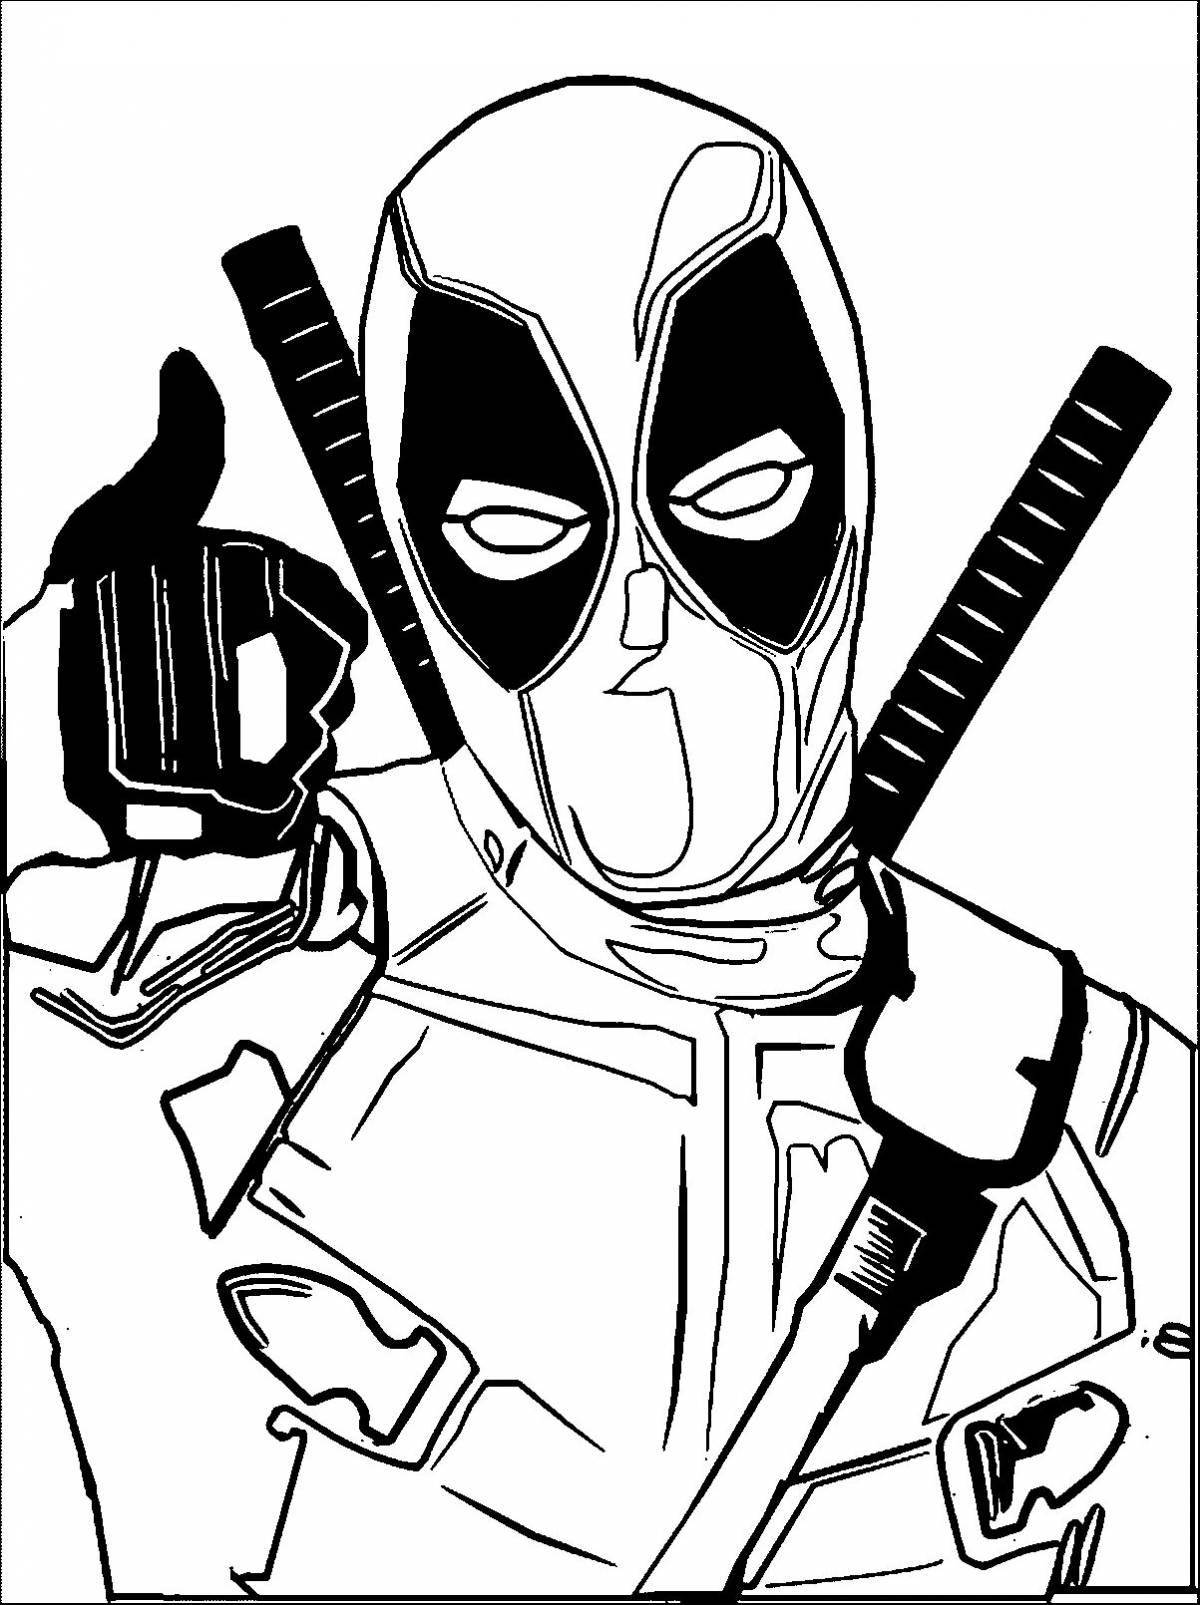 Outstanding deadpool coloring book for boys